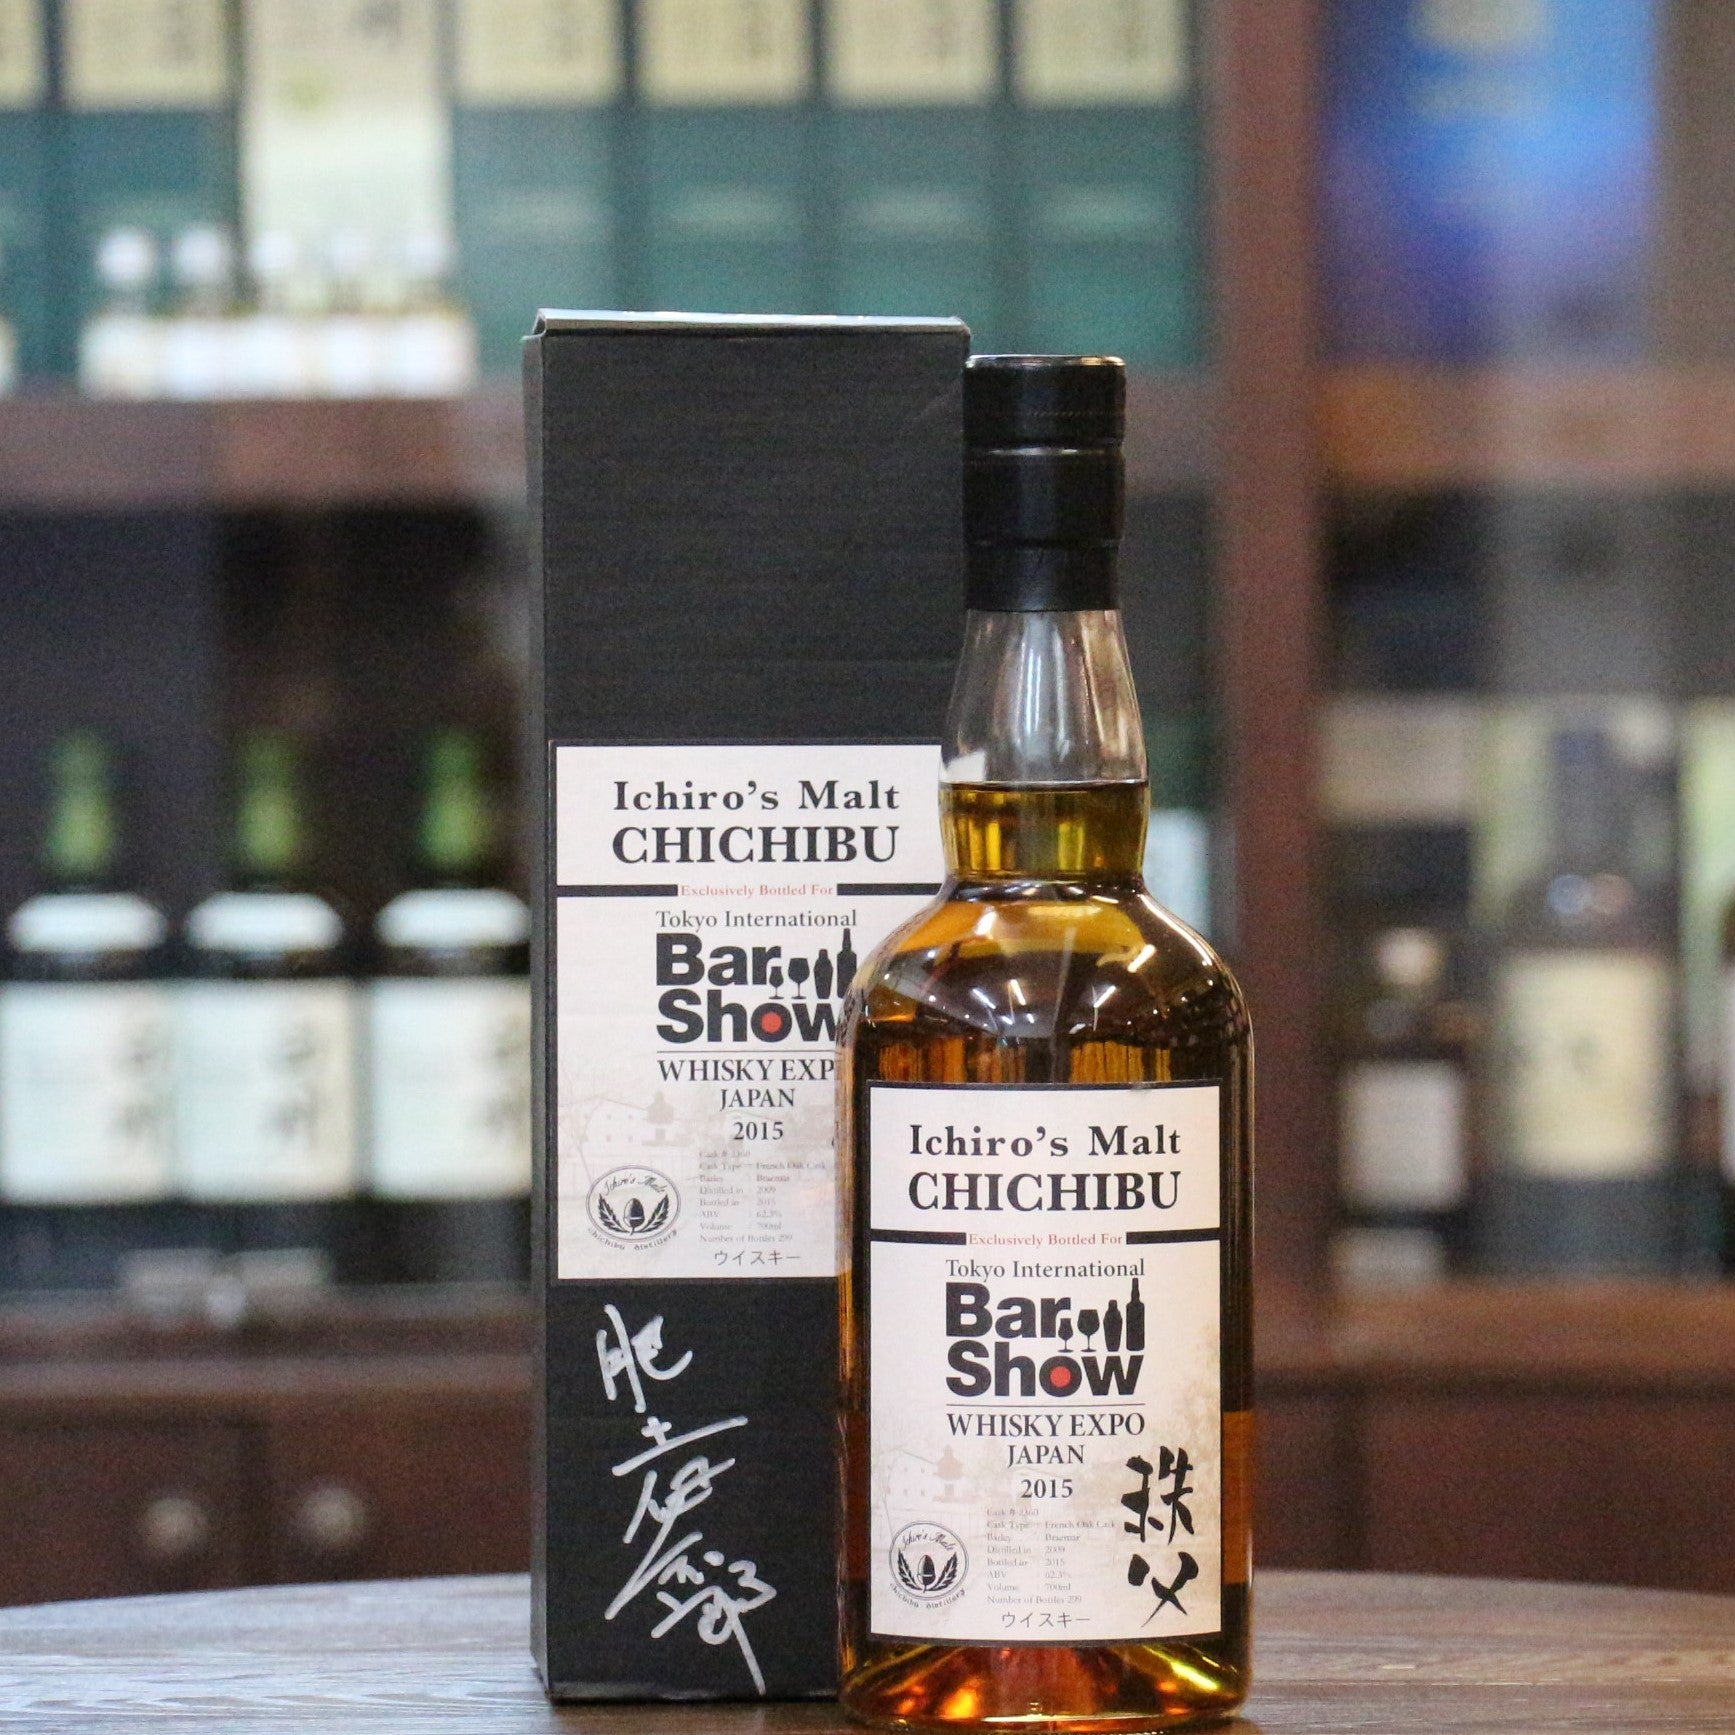 Distilled at 2009 and bottled at 2015. Cask no. 2360, one of the 299 bottles. Using the bracmar (type of barley) for ingredients and matured in French Oak Cask.